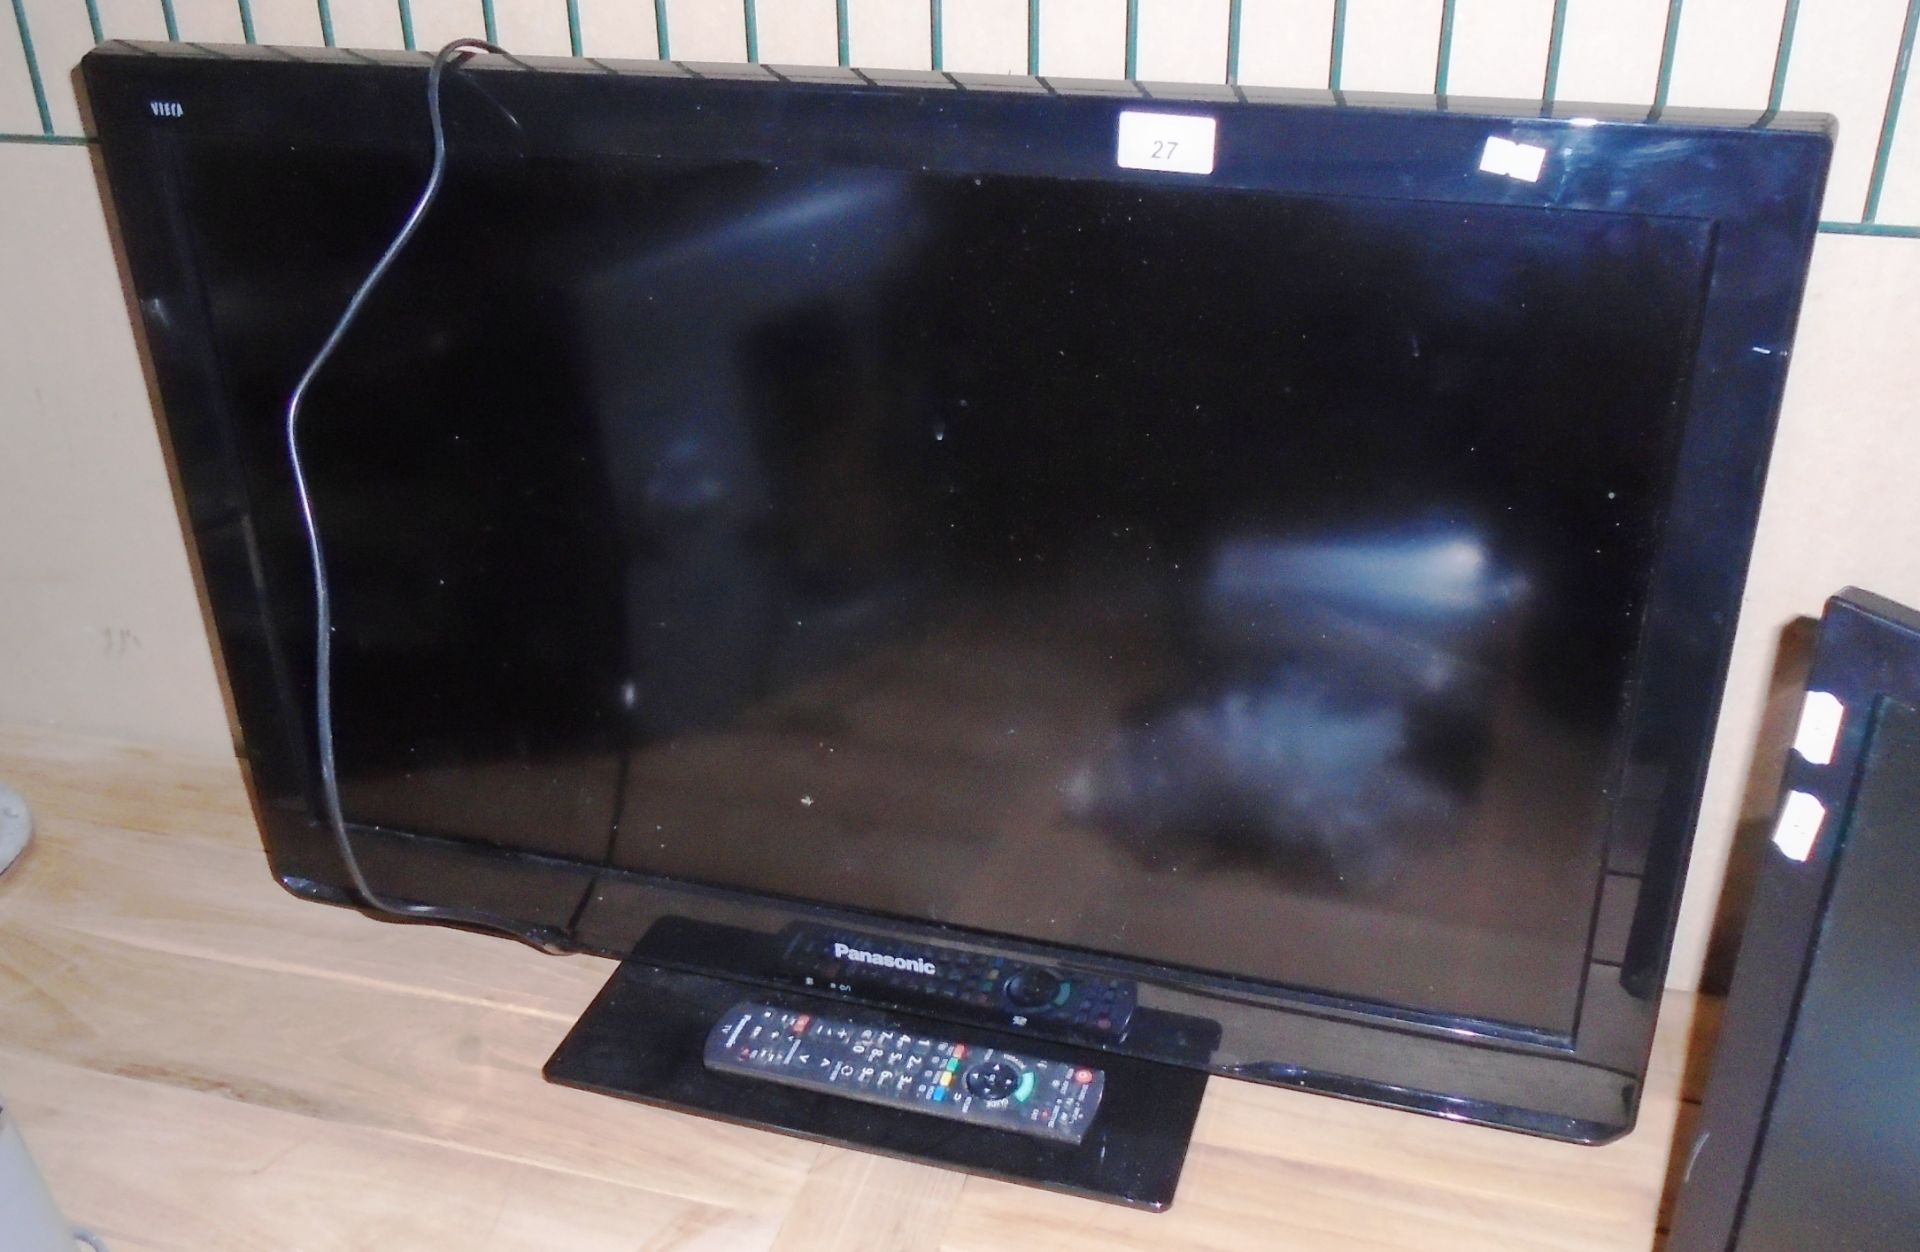 A Panasonic Viera TX-L32C3B 32"" LCD TV complete with remote control